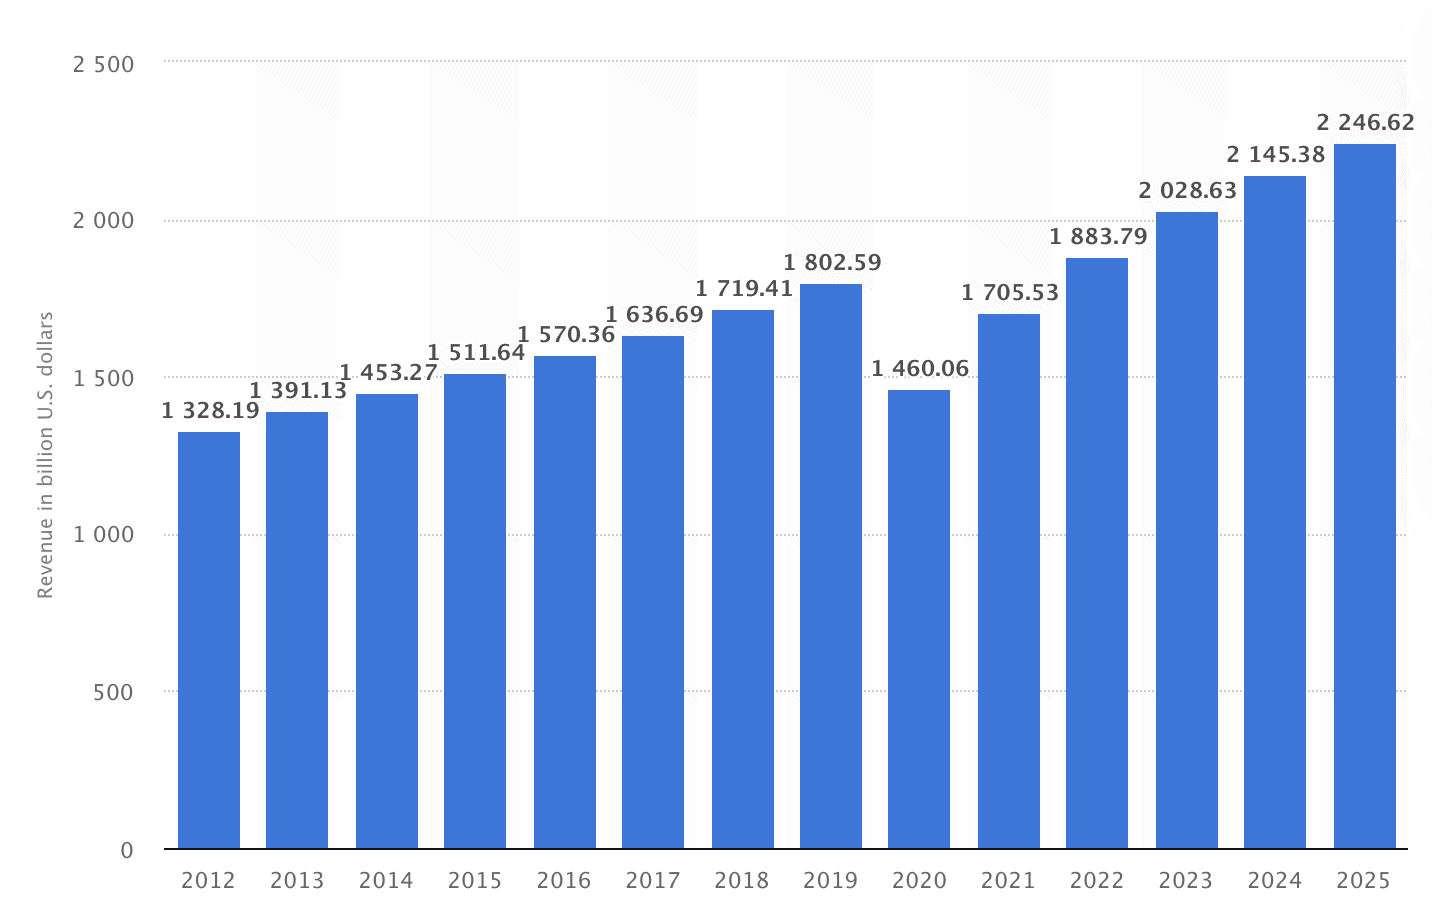 Revenue of the apparel market worldwide from 2012 to 2025